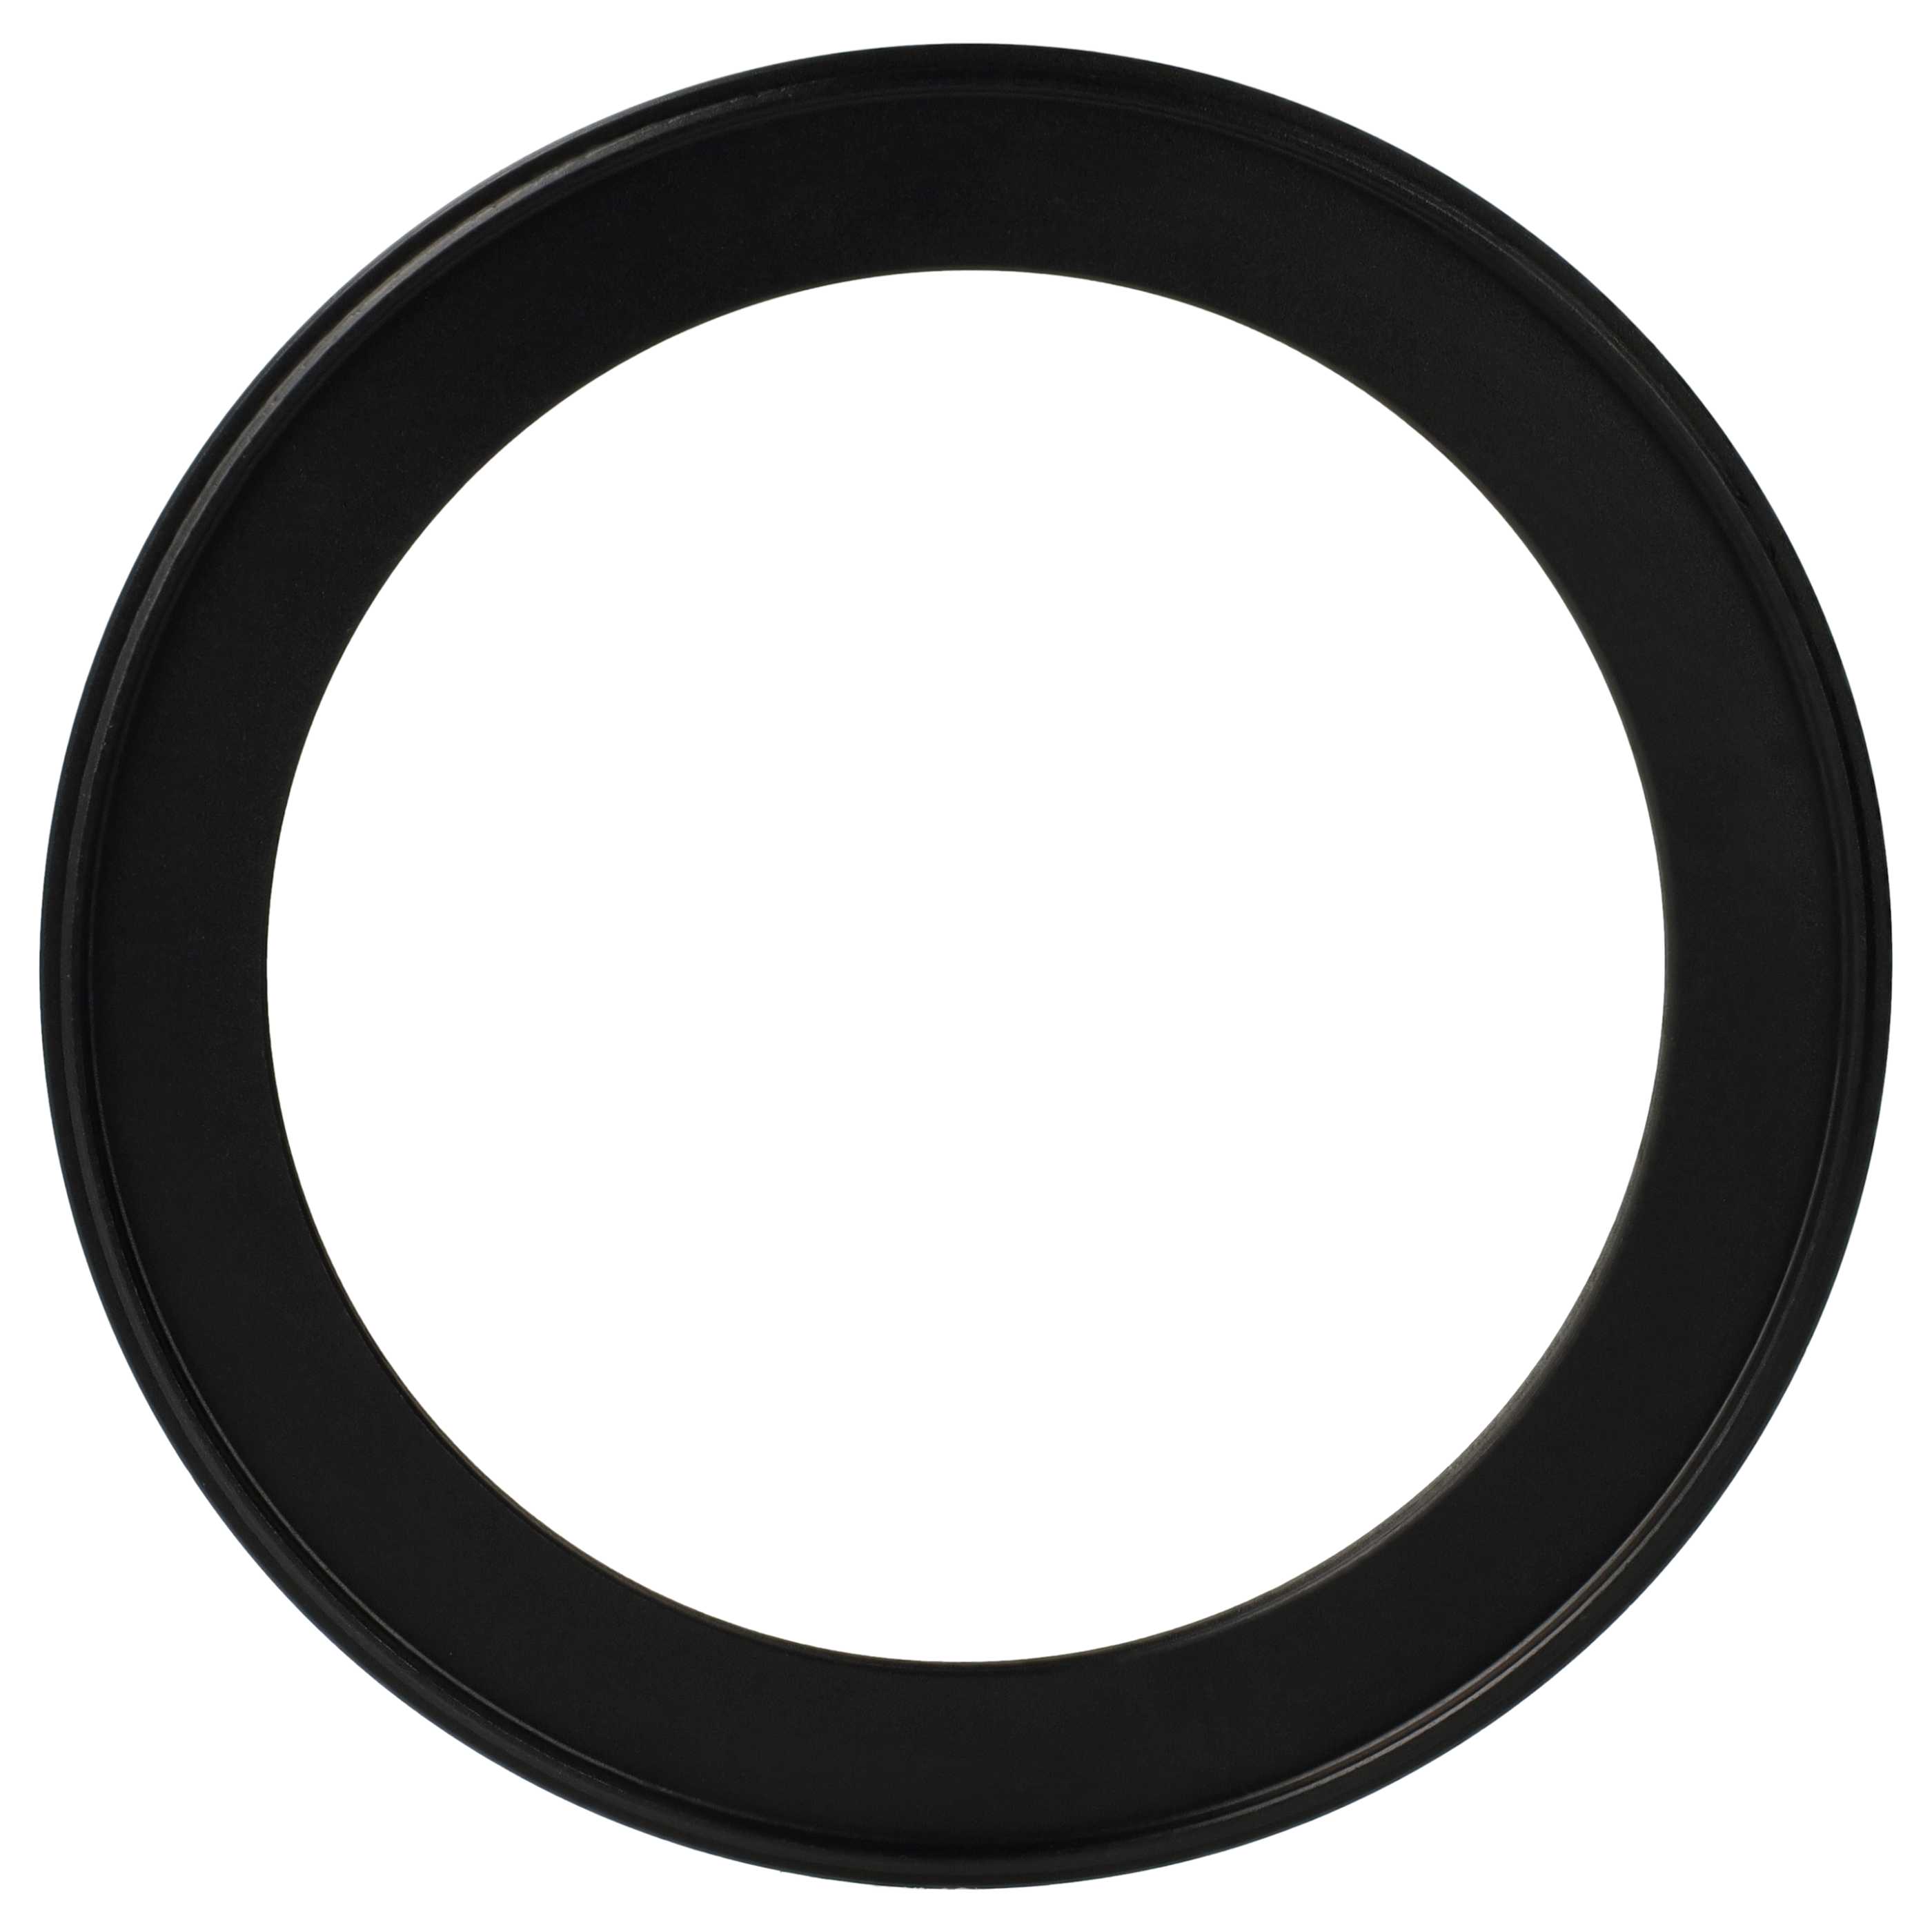 Step-Down Ring Adapter from 105 mm to 82 mm suitable for Camera Lens - Filter Adapter, metal